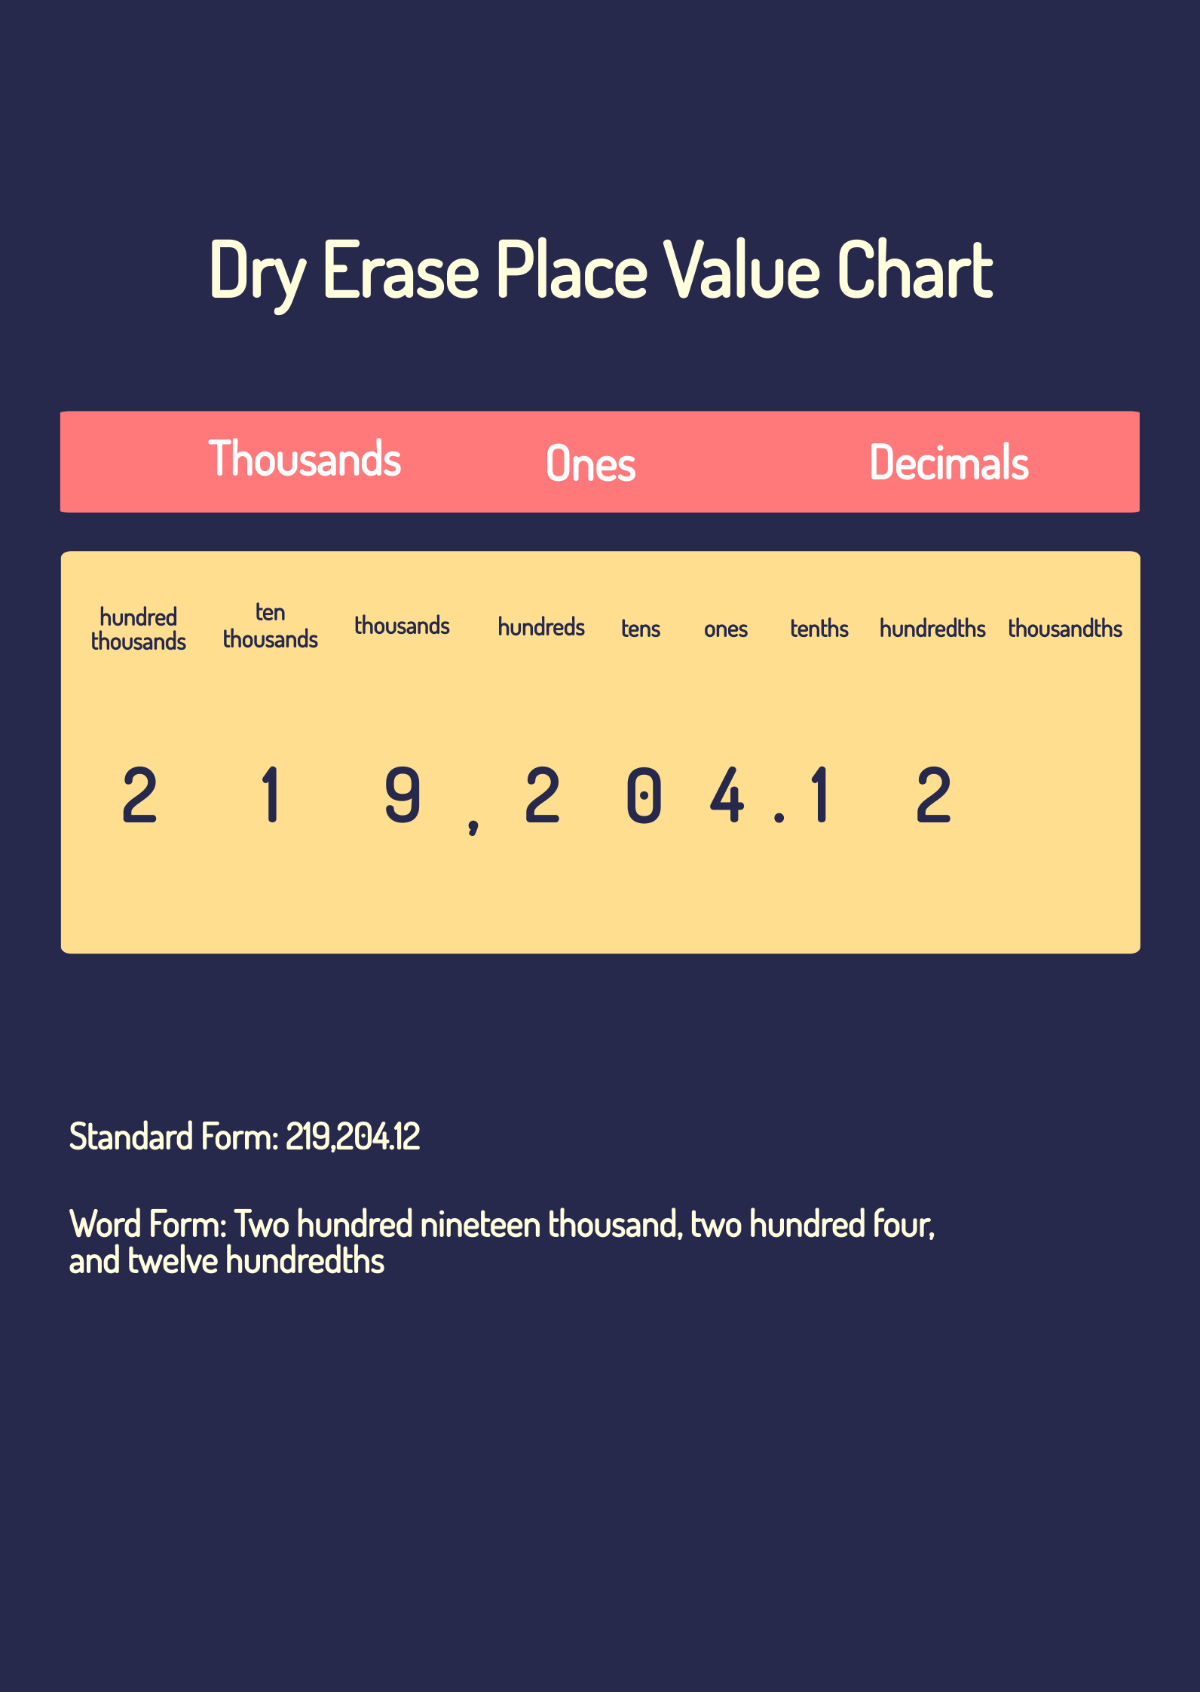 Dry Erase Place Value Chart